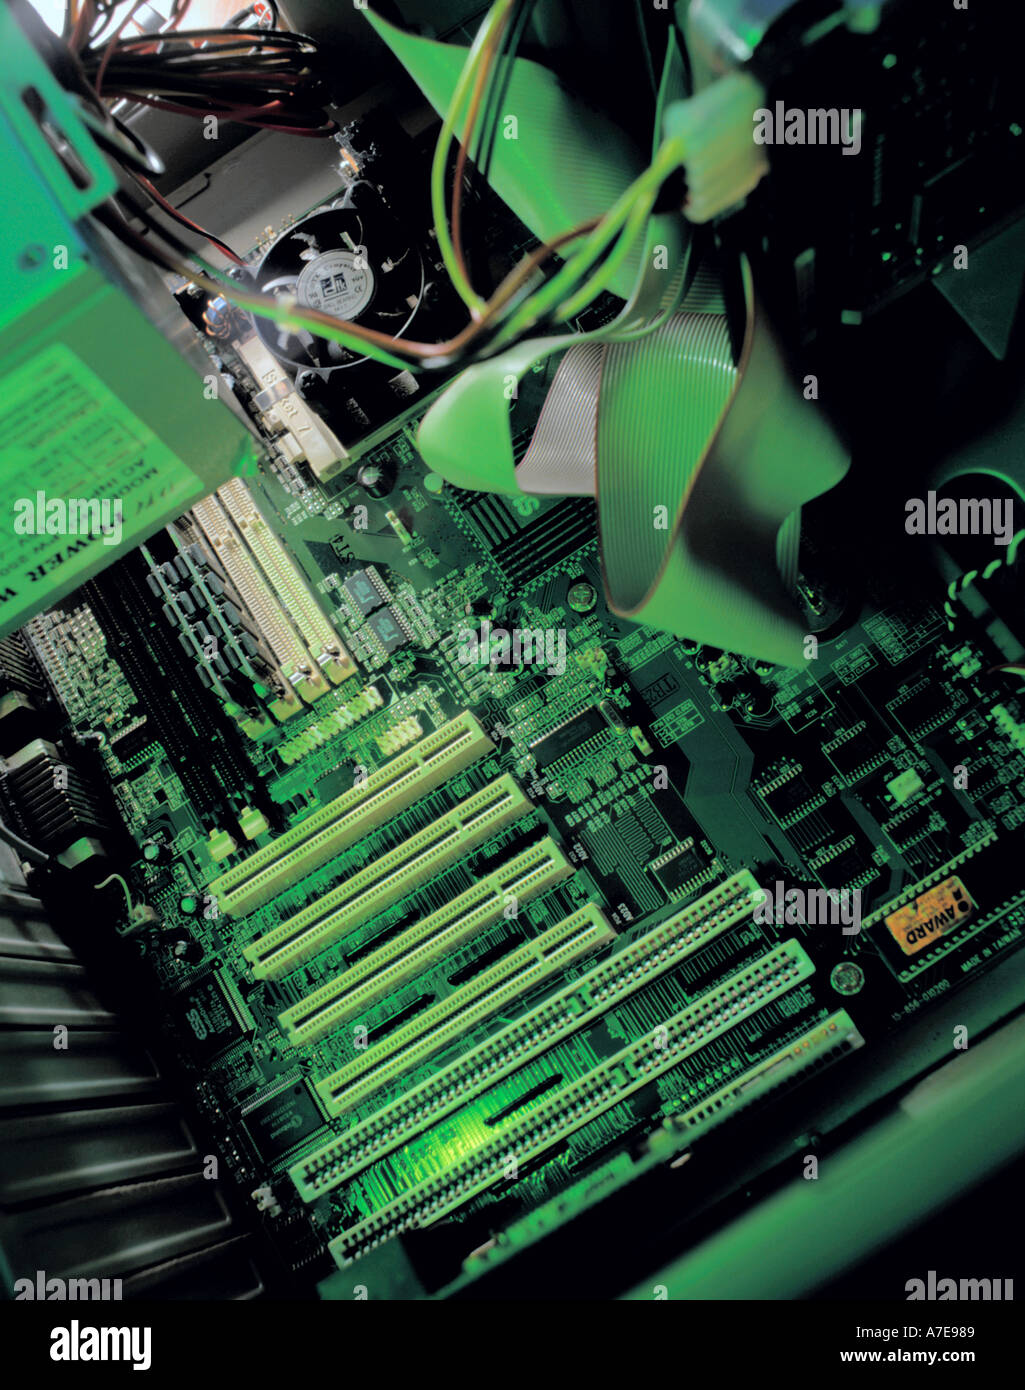 Inside a personal computer, showing mother board with SCSI connections for outlet ports at the base of the picture Stock Photo